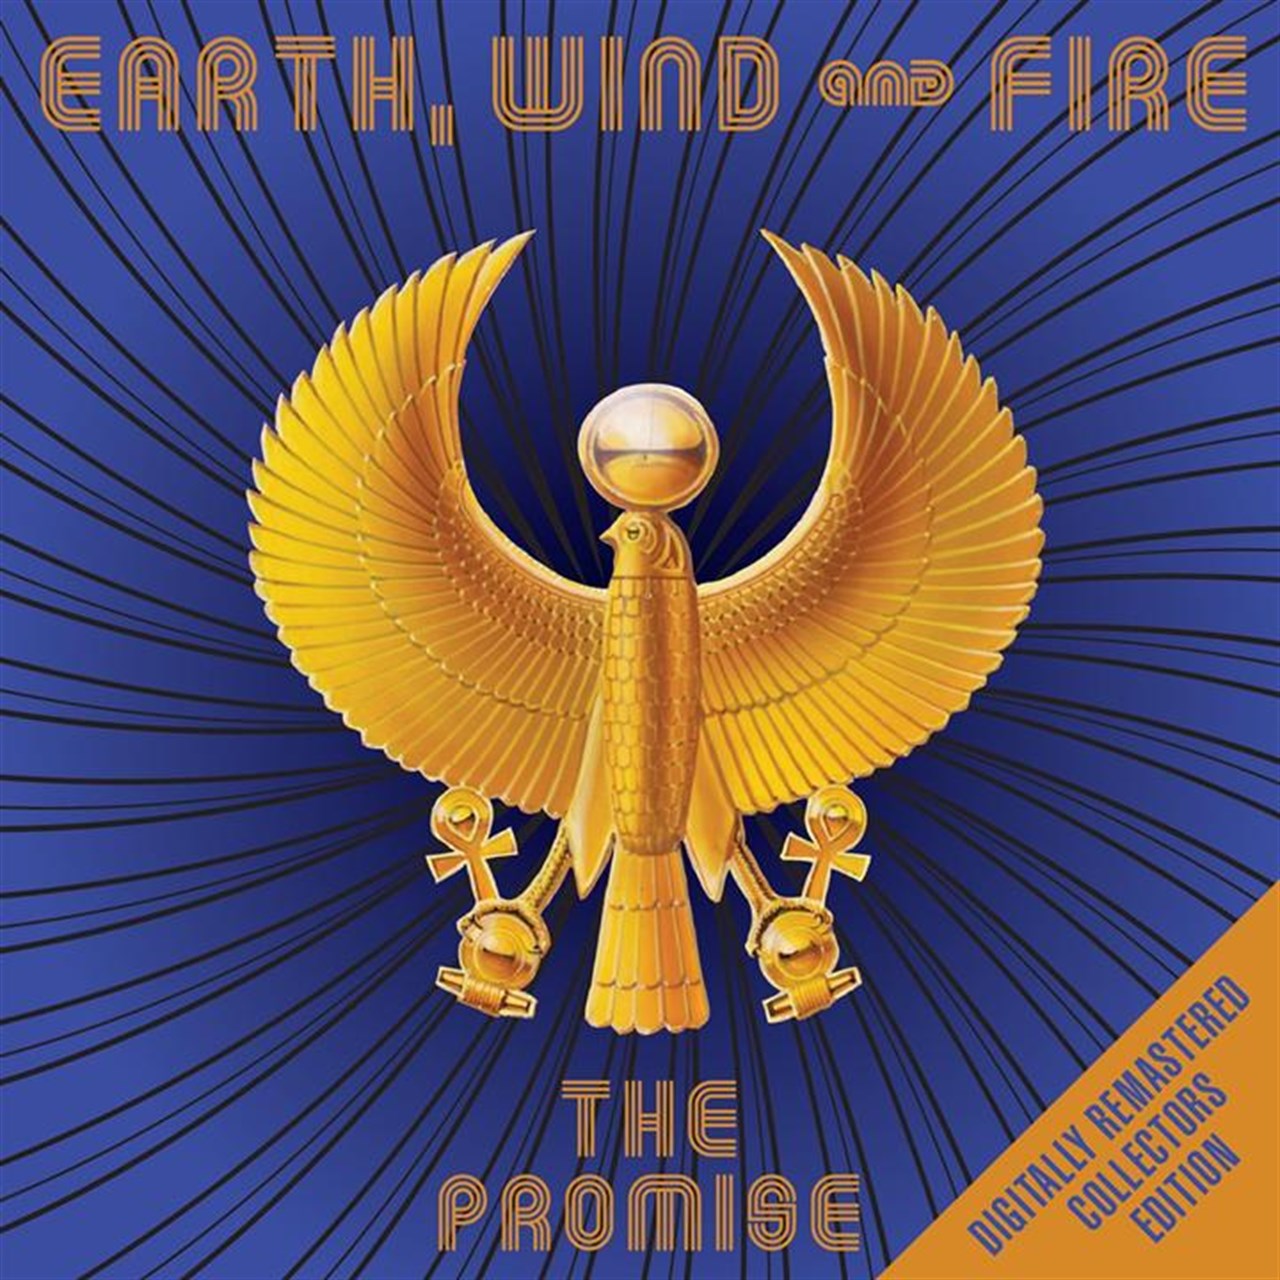 Art for Wiggle by Earth, Wind & Fire